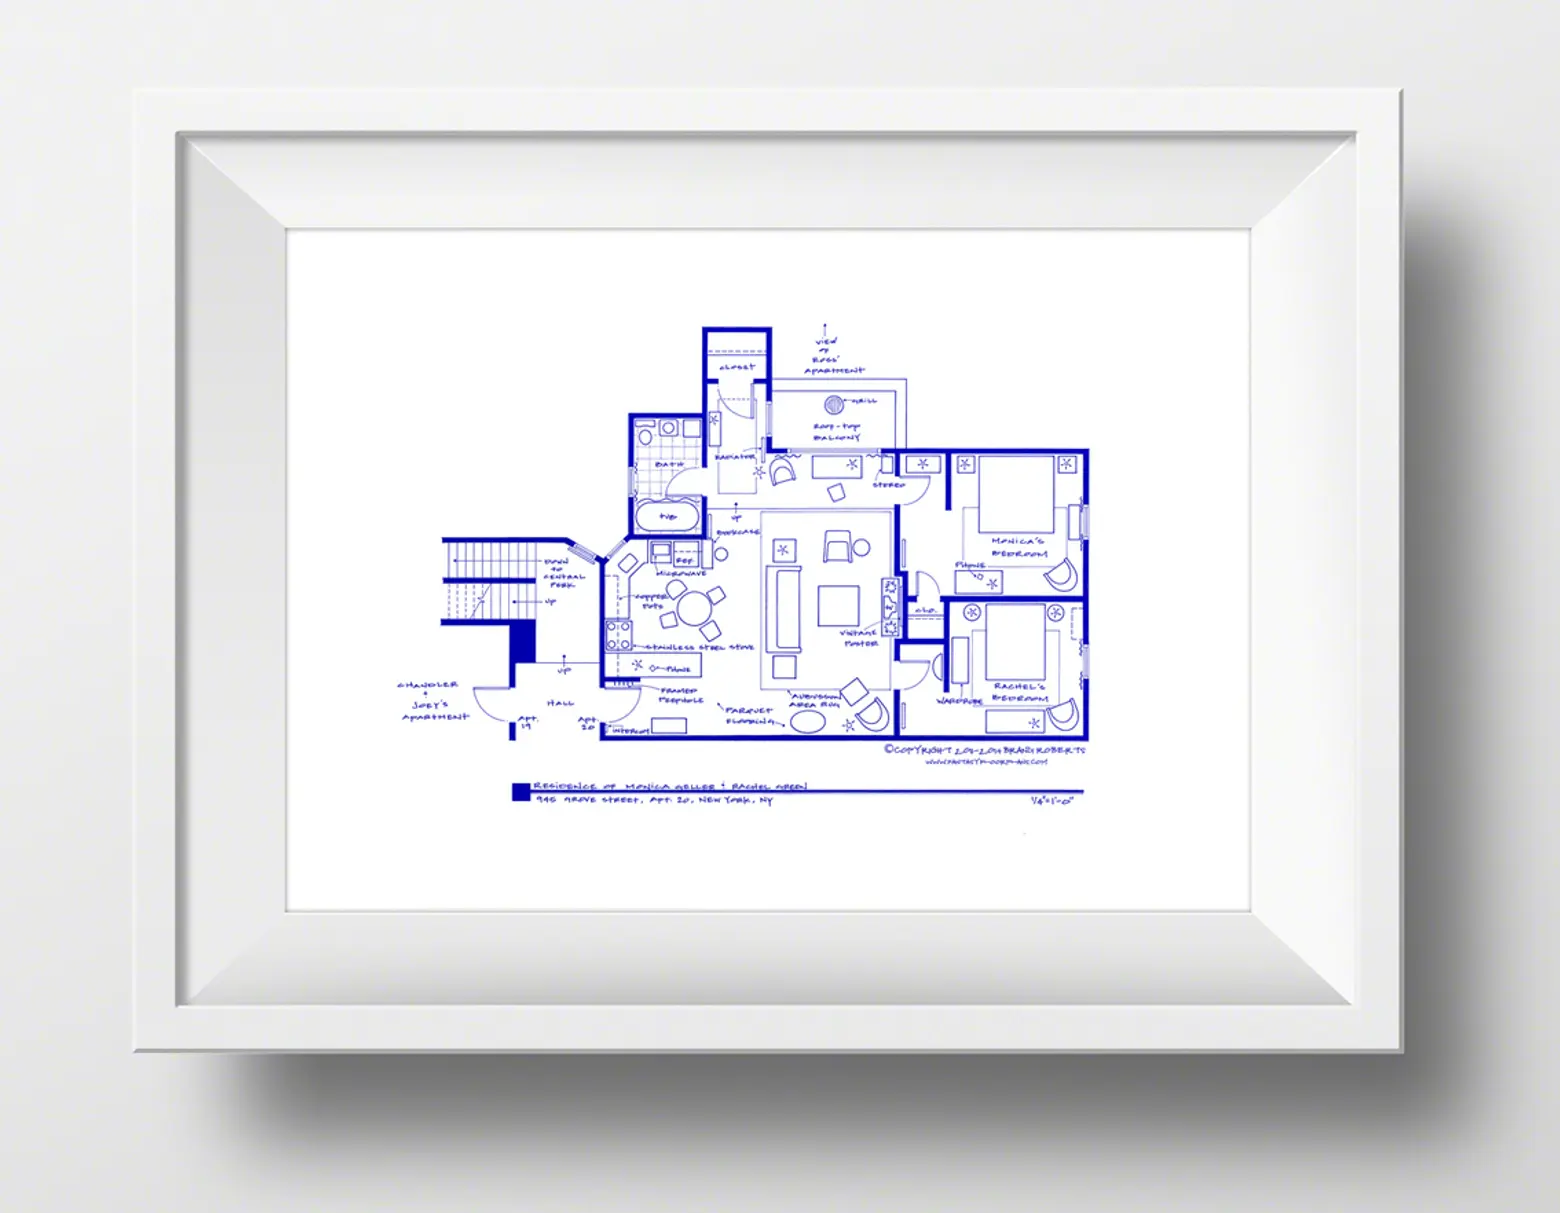 Fantasy Floorplans Bring to Life Your Favorite TV Show Homes from ‘Friends’ to ‘Mad Men’